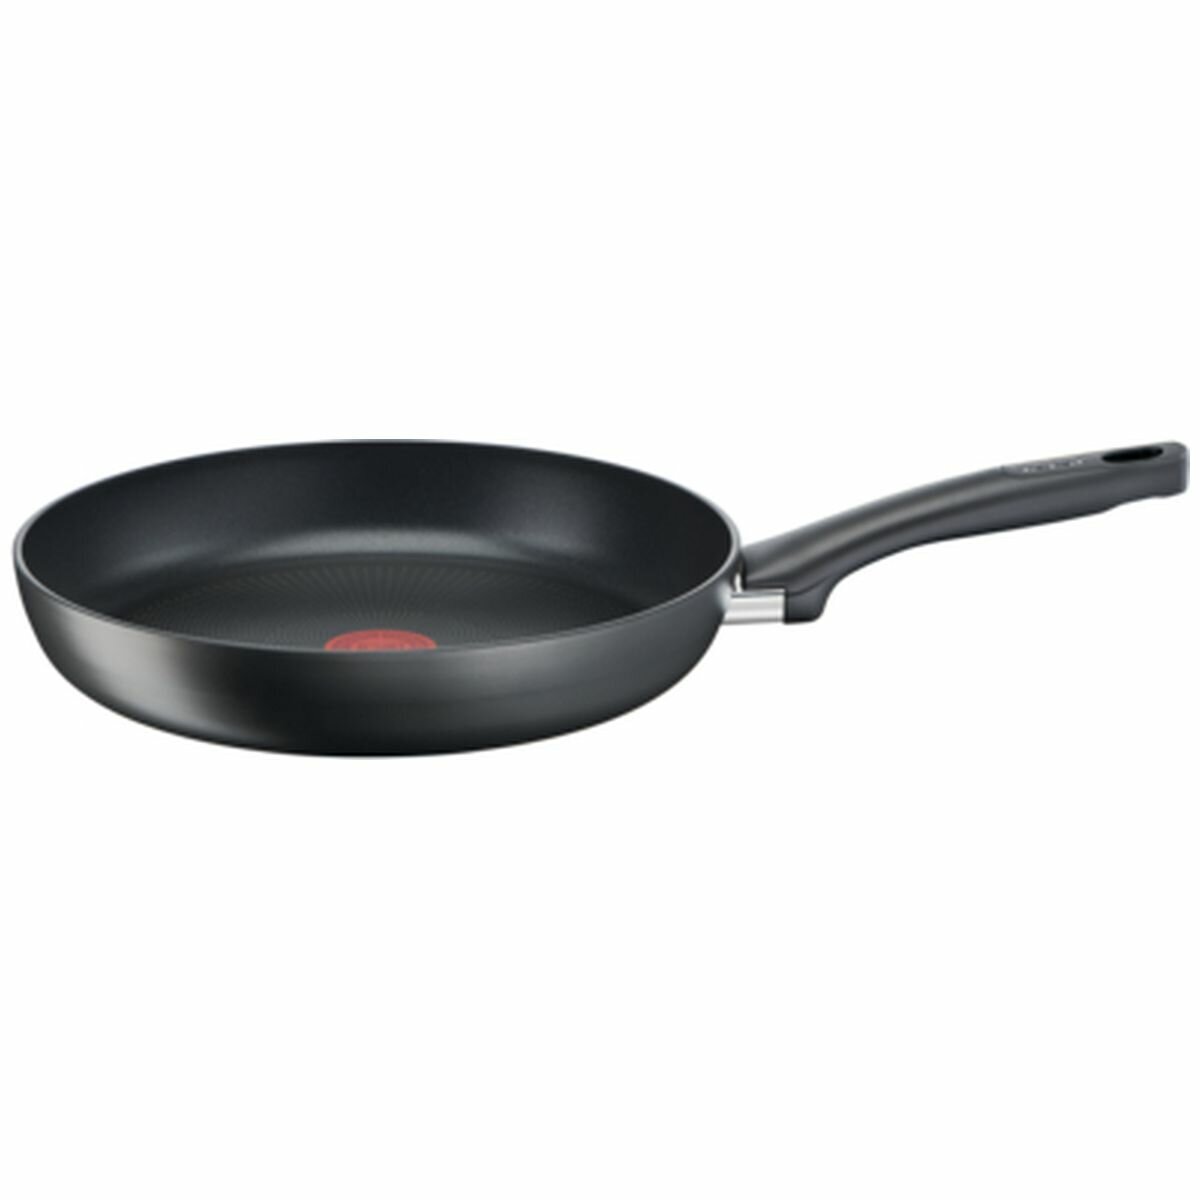 Tefal Ultimate Non-Stick Induction 6 Piece Cookware Set In Black